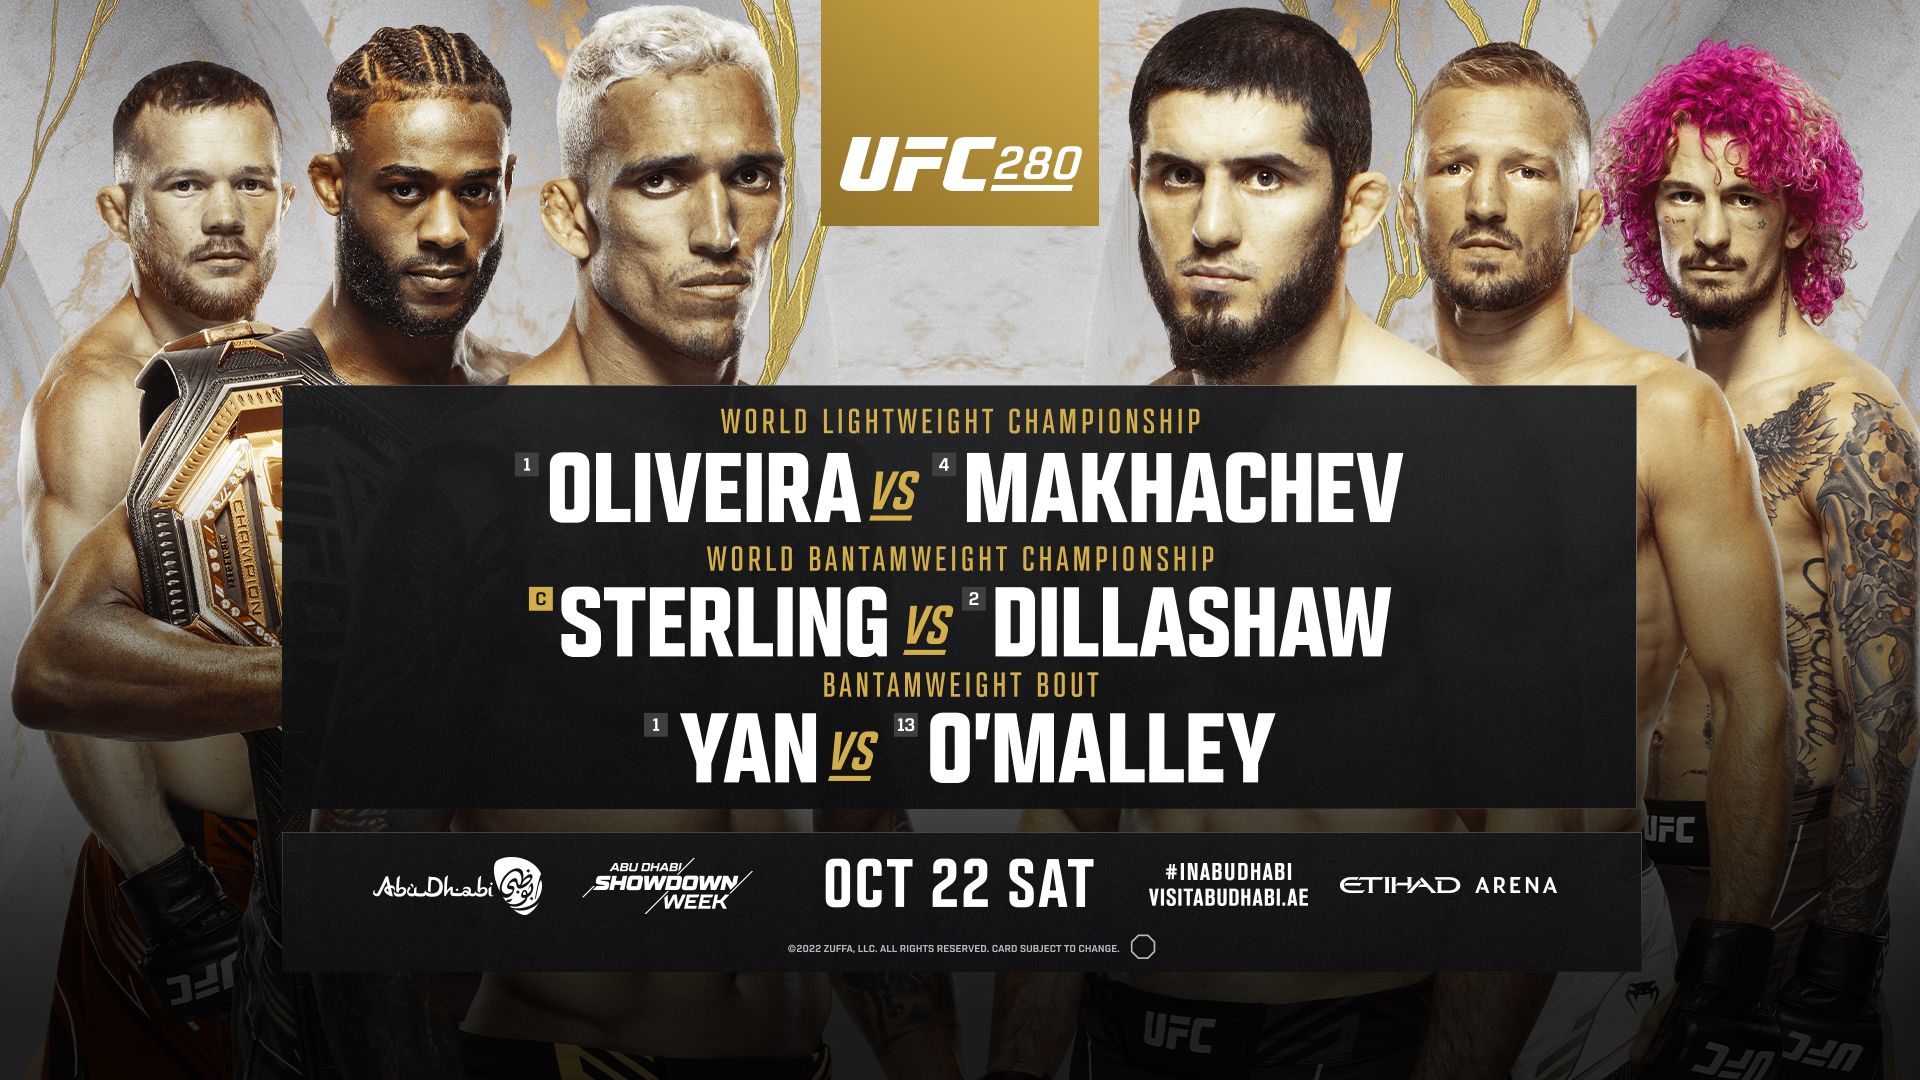 Is UFC 280 on PPV in the UK?